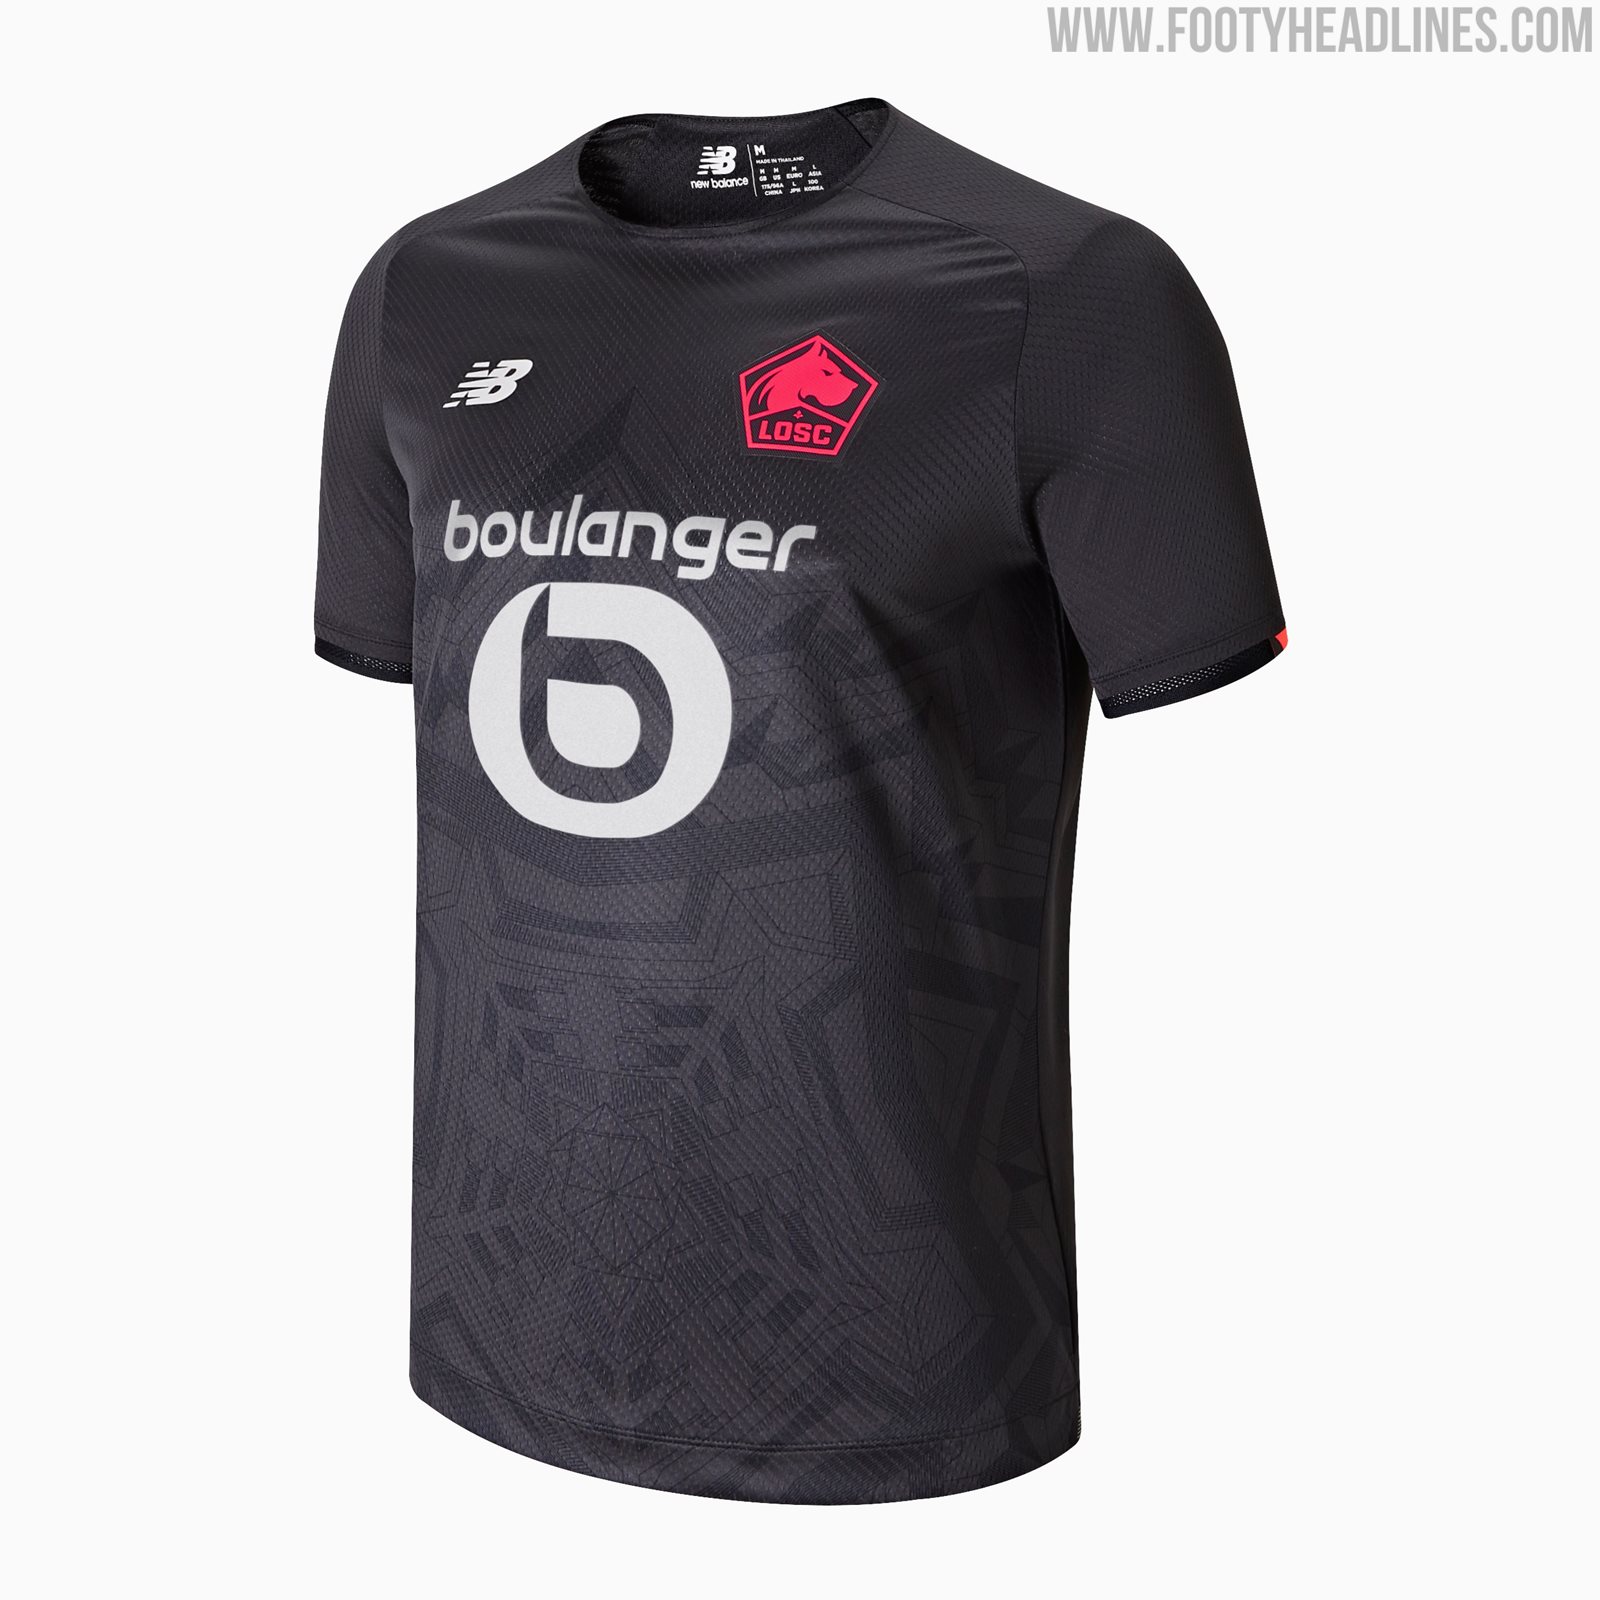 Lille LOSC 21-22 Third Kit Released - Footy Headlines